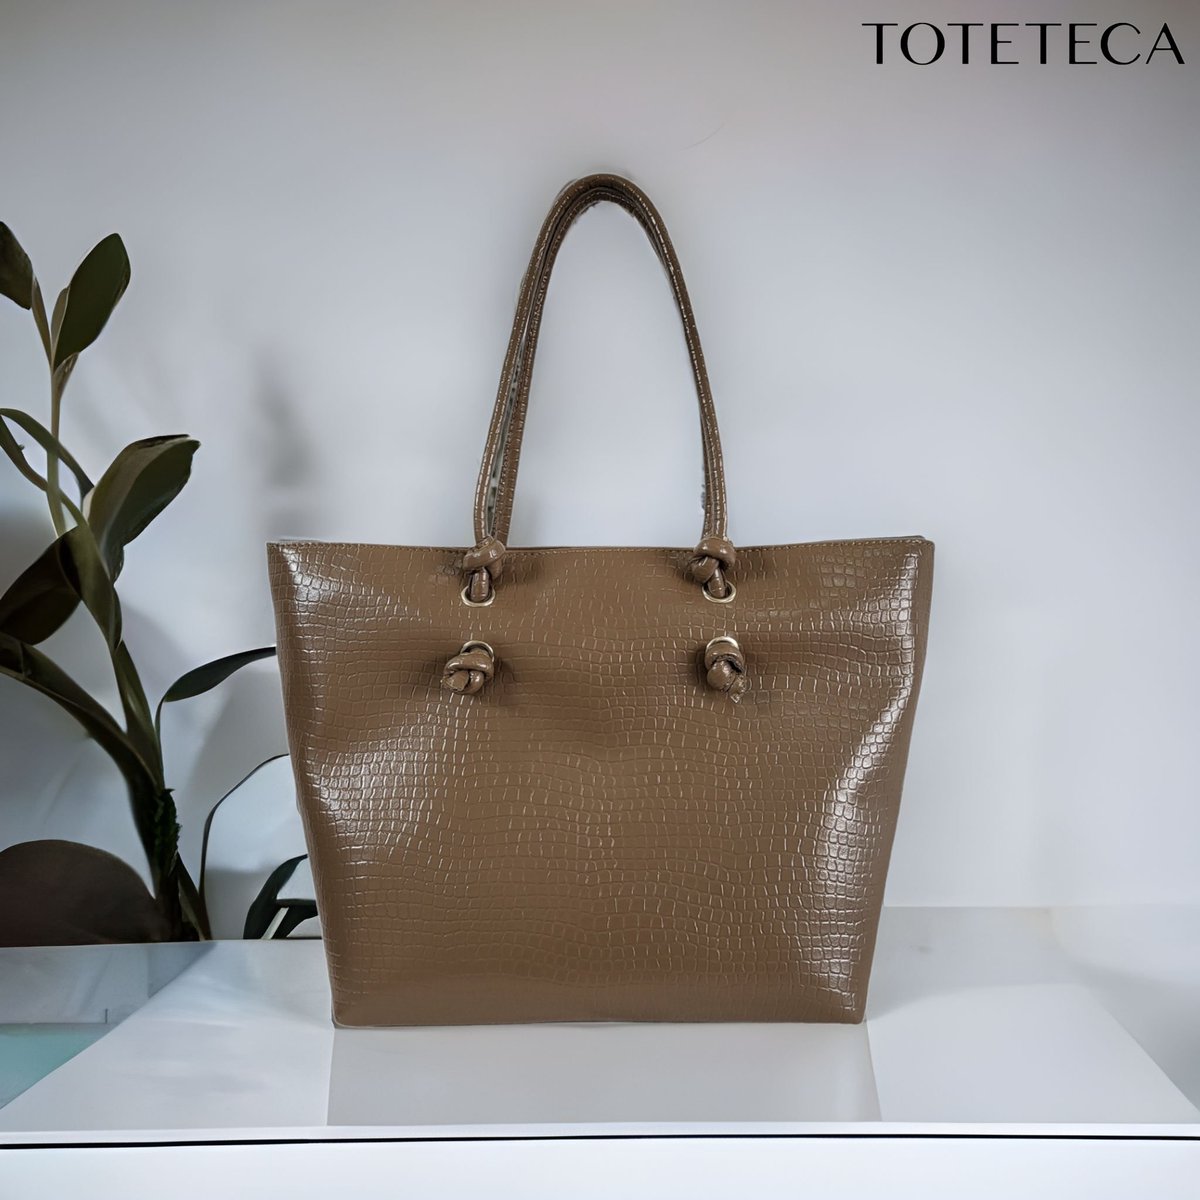 Exciting news! The new #knottedhandlecollection from #toteteca is coming in March 2023. This beige faux leather #crocodileskin bag is the epitome of minimal sophistication. Get ready to elevate your style! #fashionista #handbags #designerbags #luxuryfashion #baglove #accessorize